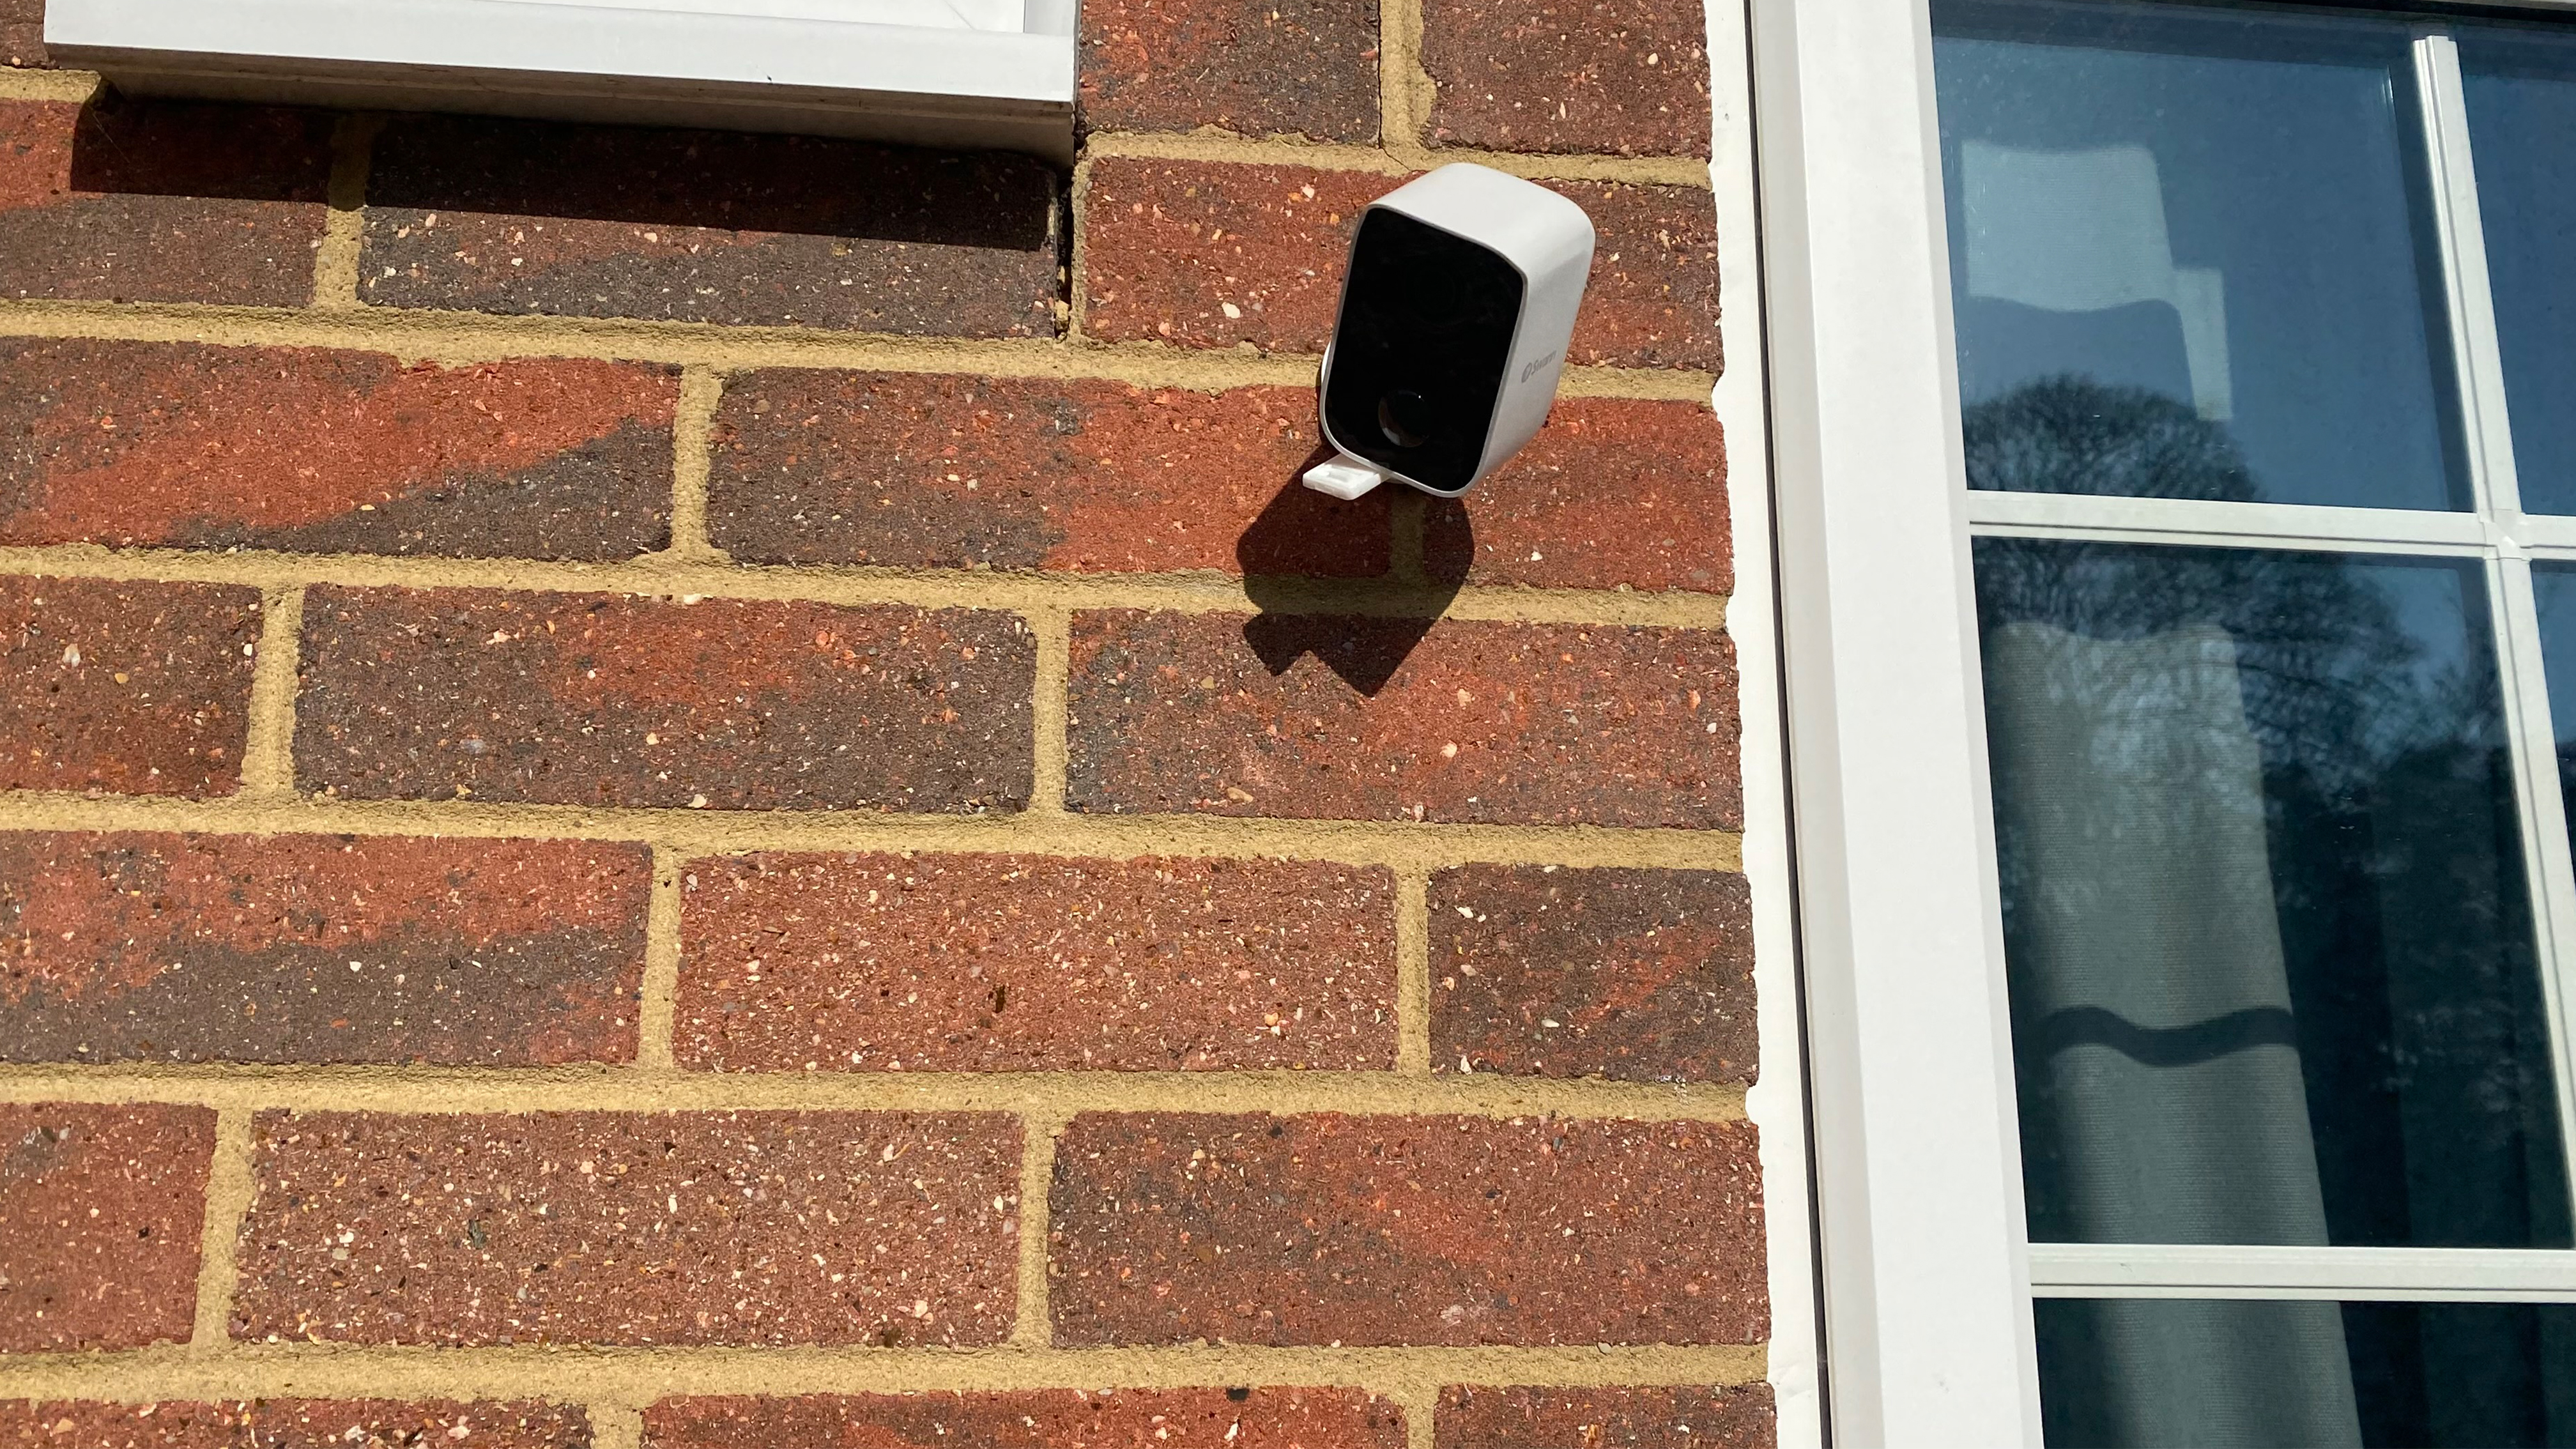 Swann CoreCam mounted on exterior wall